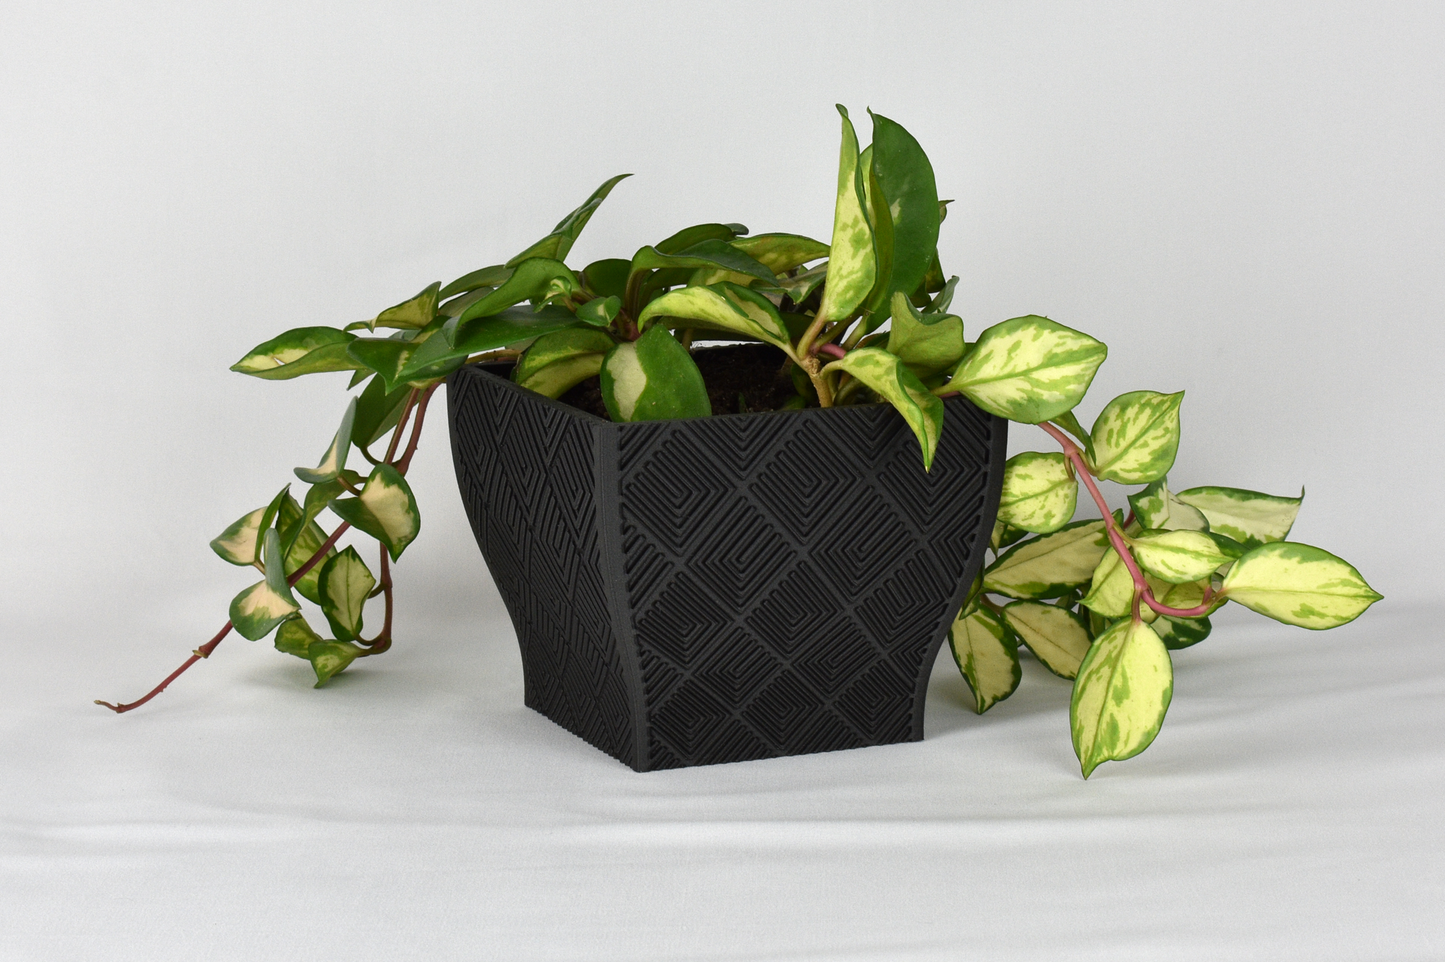 6-inch Square Planter, Geometric Pattern #3, Drainage, Optional Saucer, Outdoor Safe Flower Pot, 30+ Colors